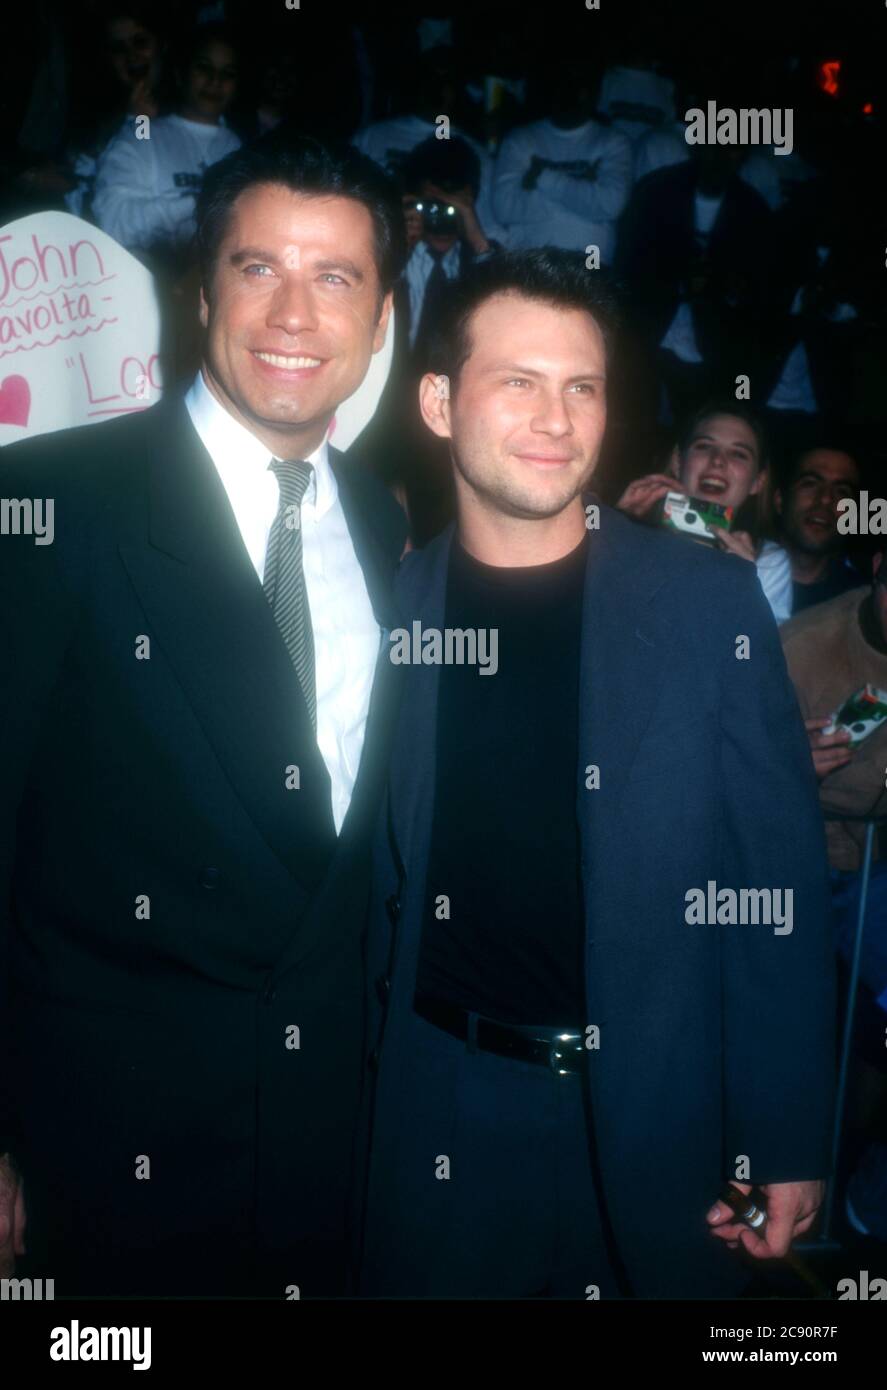 Westwood, California, USA 5th February 1996 Actor John Travolta and actor Christian Slater attend 20th Century Fox' 'Broken Arrow' Premiere on February 5, 1996 at Mann Village Theatre in Westwood, California, USA. Photo by Barry King/Alamy Stock Photo Stock Photo